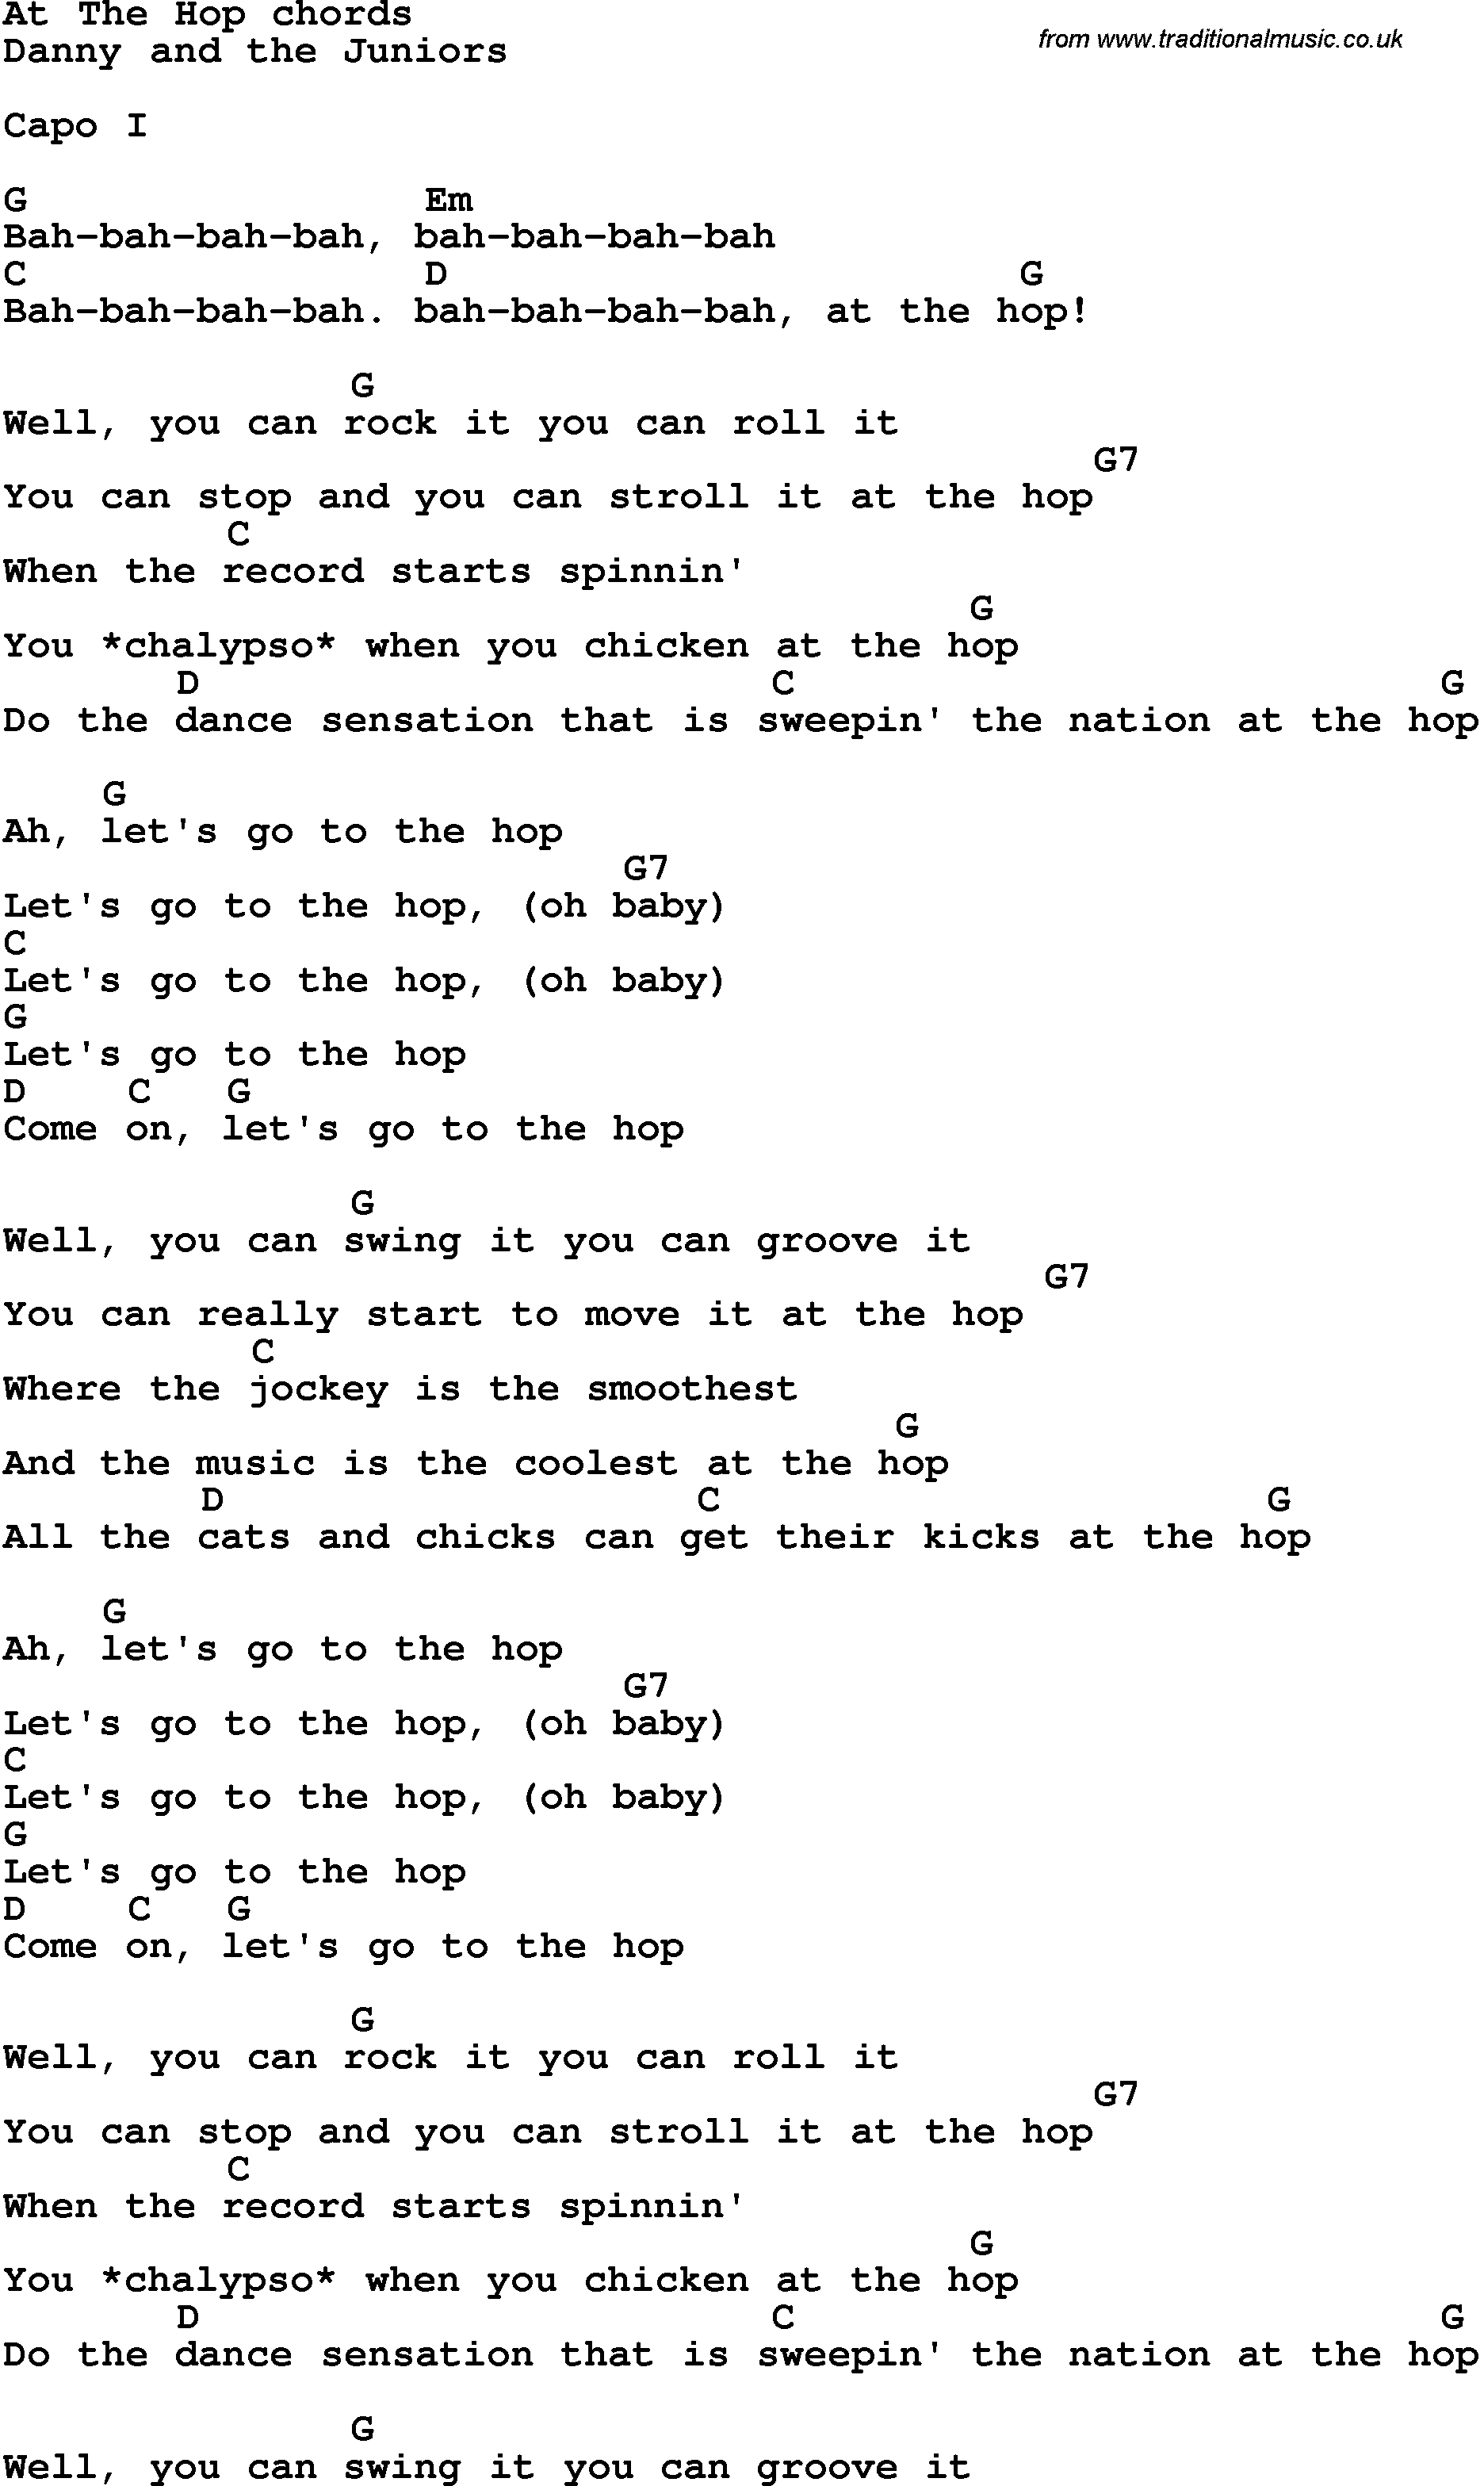 Song Lyrics With Guitar Chords For At The Hop | Music In 2019 - Free Printable Song Lyrics With Guitar Chords